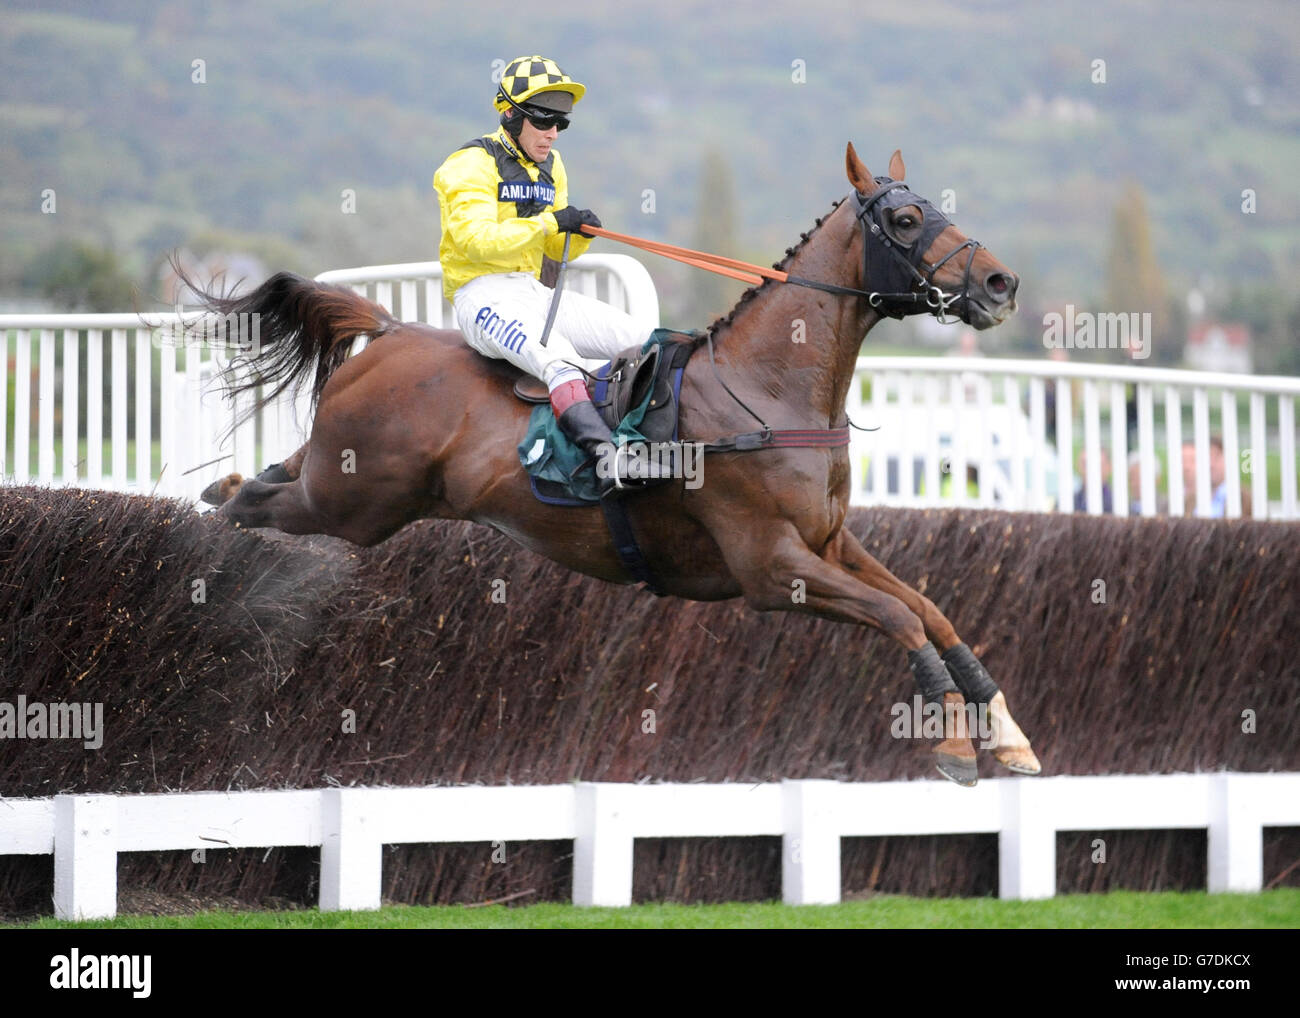 Lamb or Cod ridden by Richard Johnson competes in the Ryman Stationery Cheltenham Business Club Novices' Steeple Chase during day one of the 2014 Showcase meeting at Cheltenham Racecourse, Cheltenham. Stock Photo